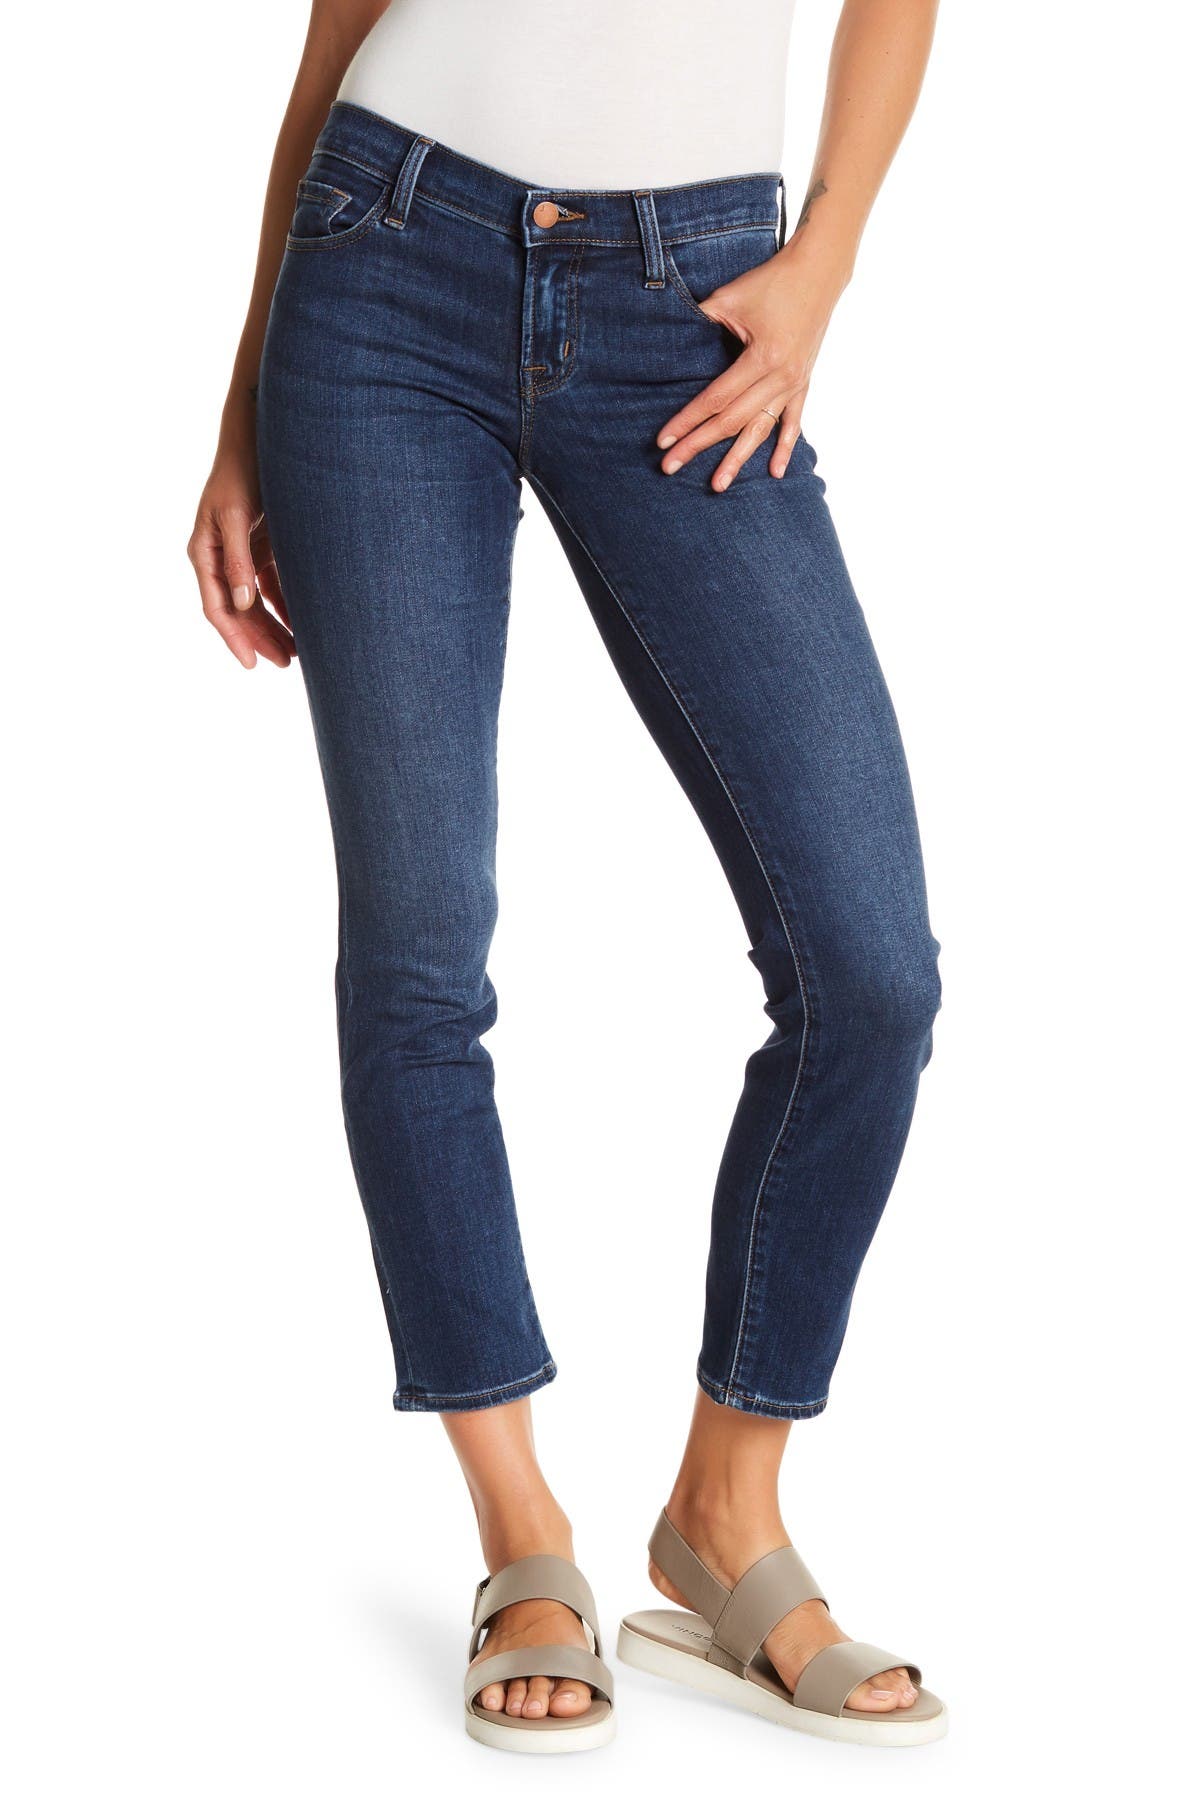 low rise hipster jeans